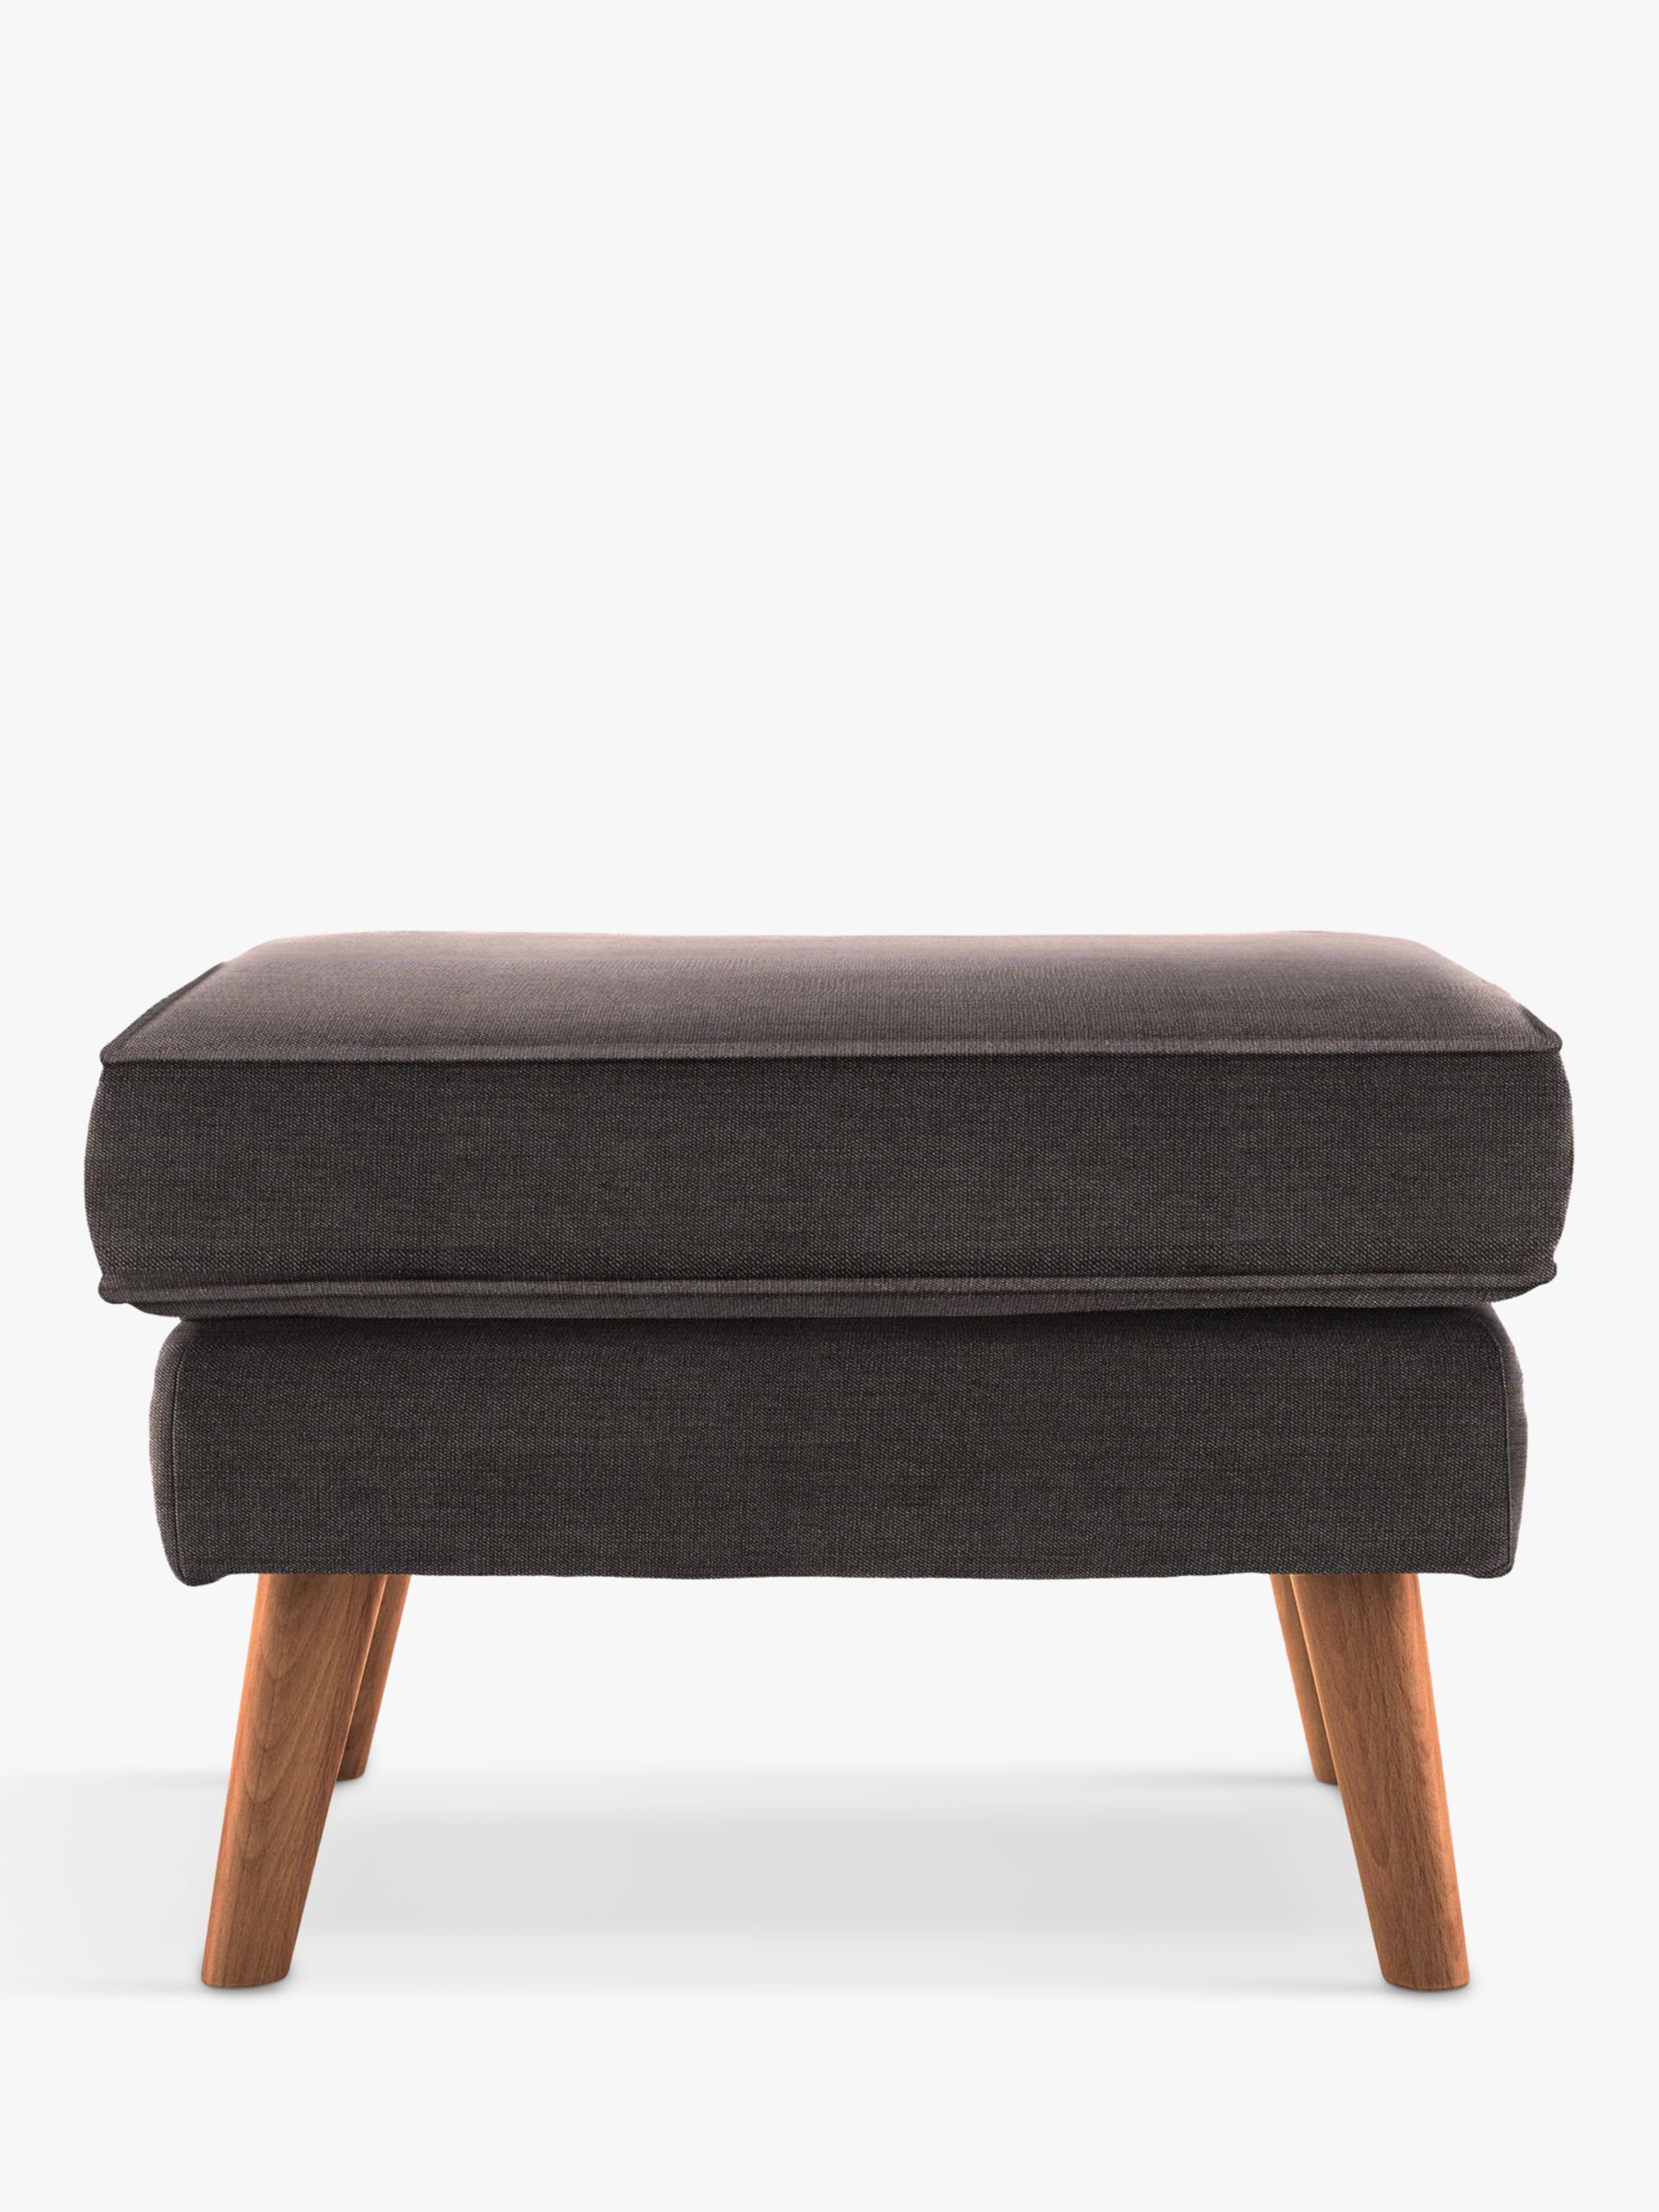 The Sixty Five Range, G Plan Vintage The Sixty Five Footstool, Tonic Charcoal